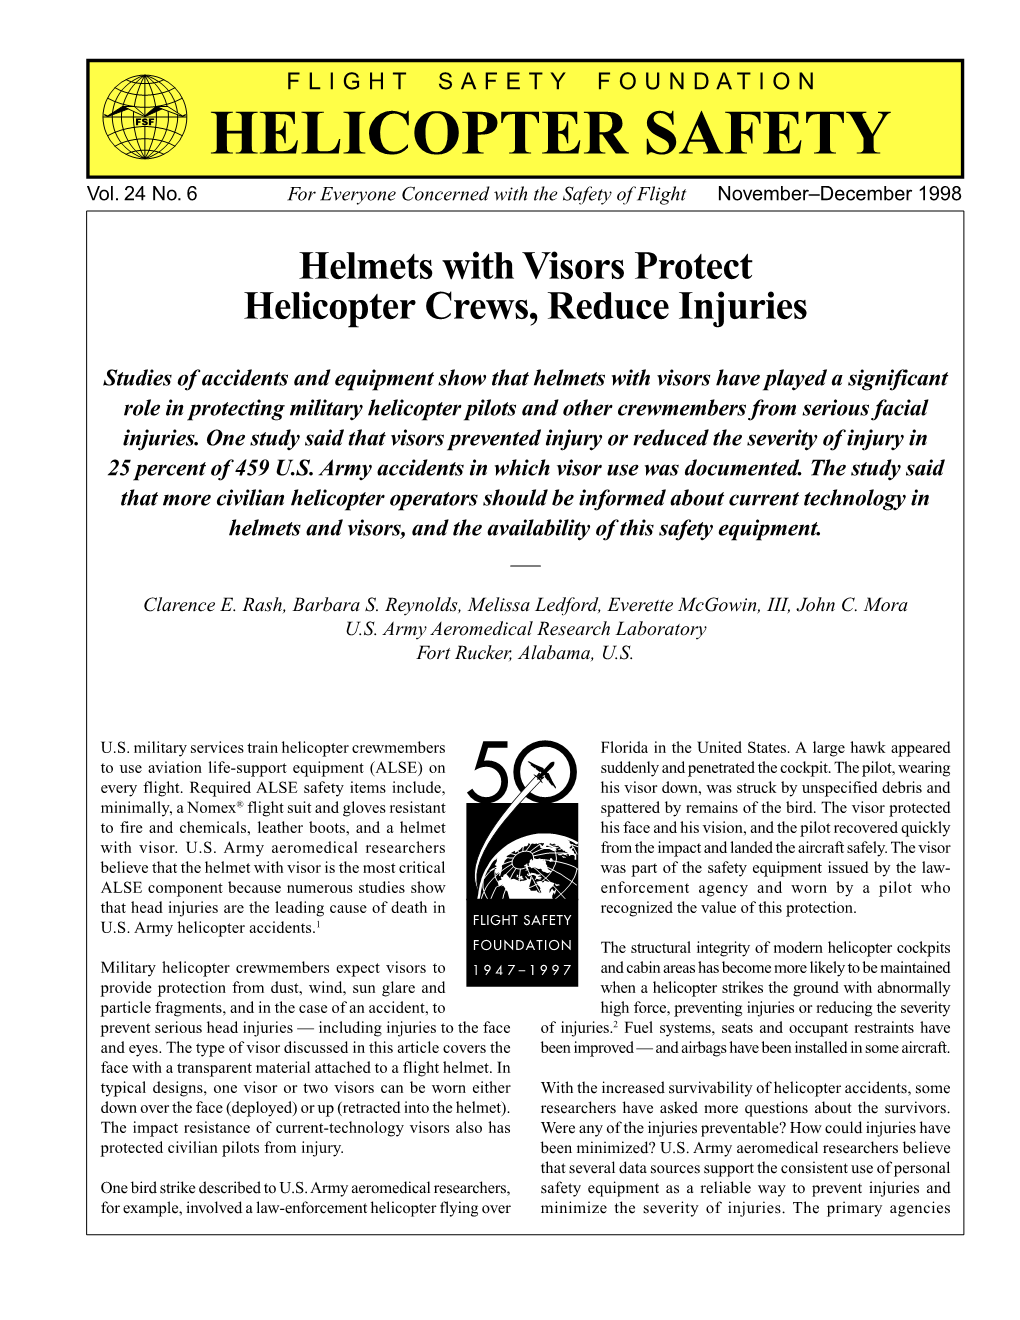 Helmets with Visors Protect Helicopter Crews, Reduce Injuries